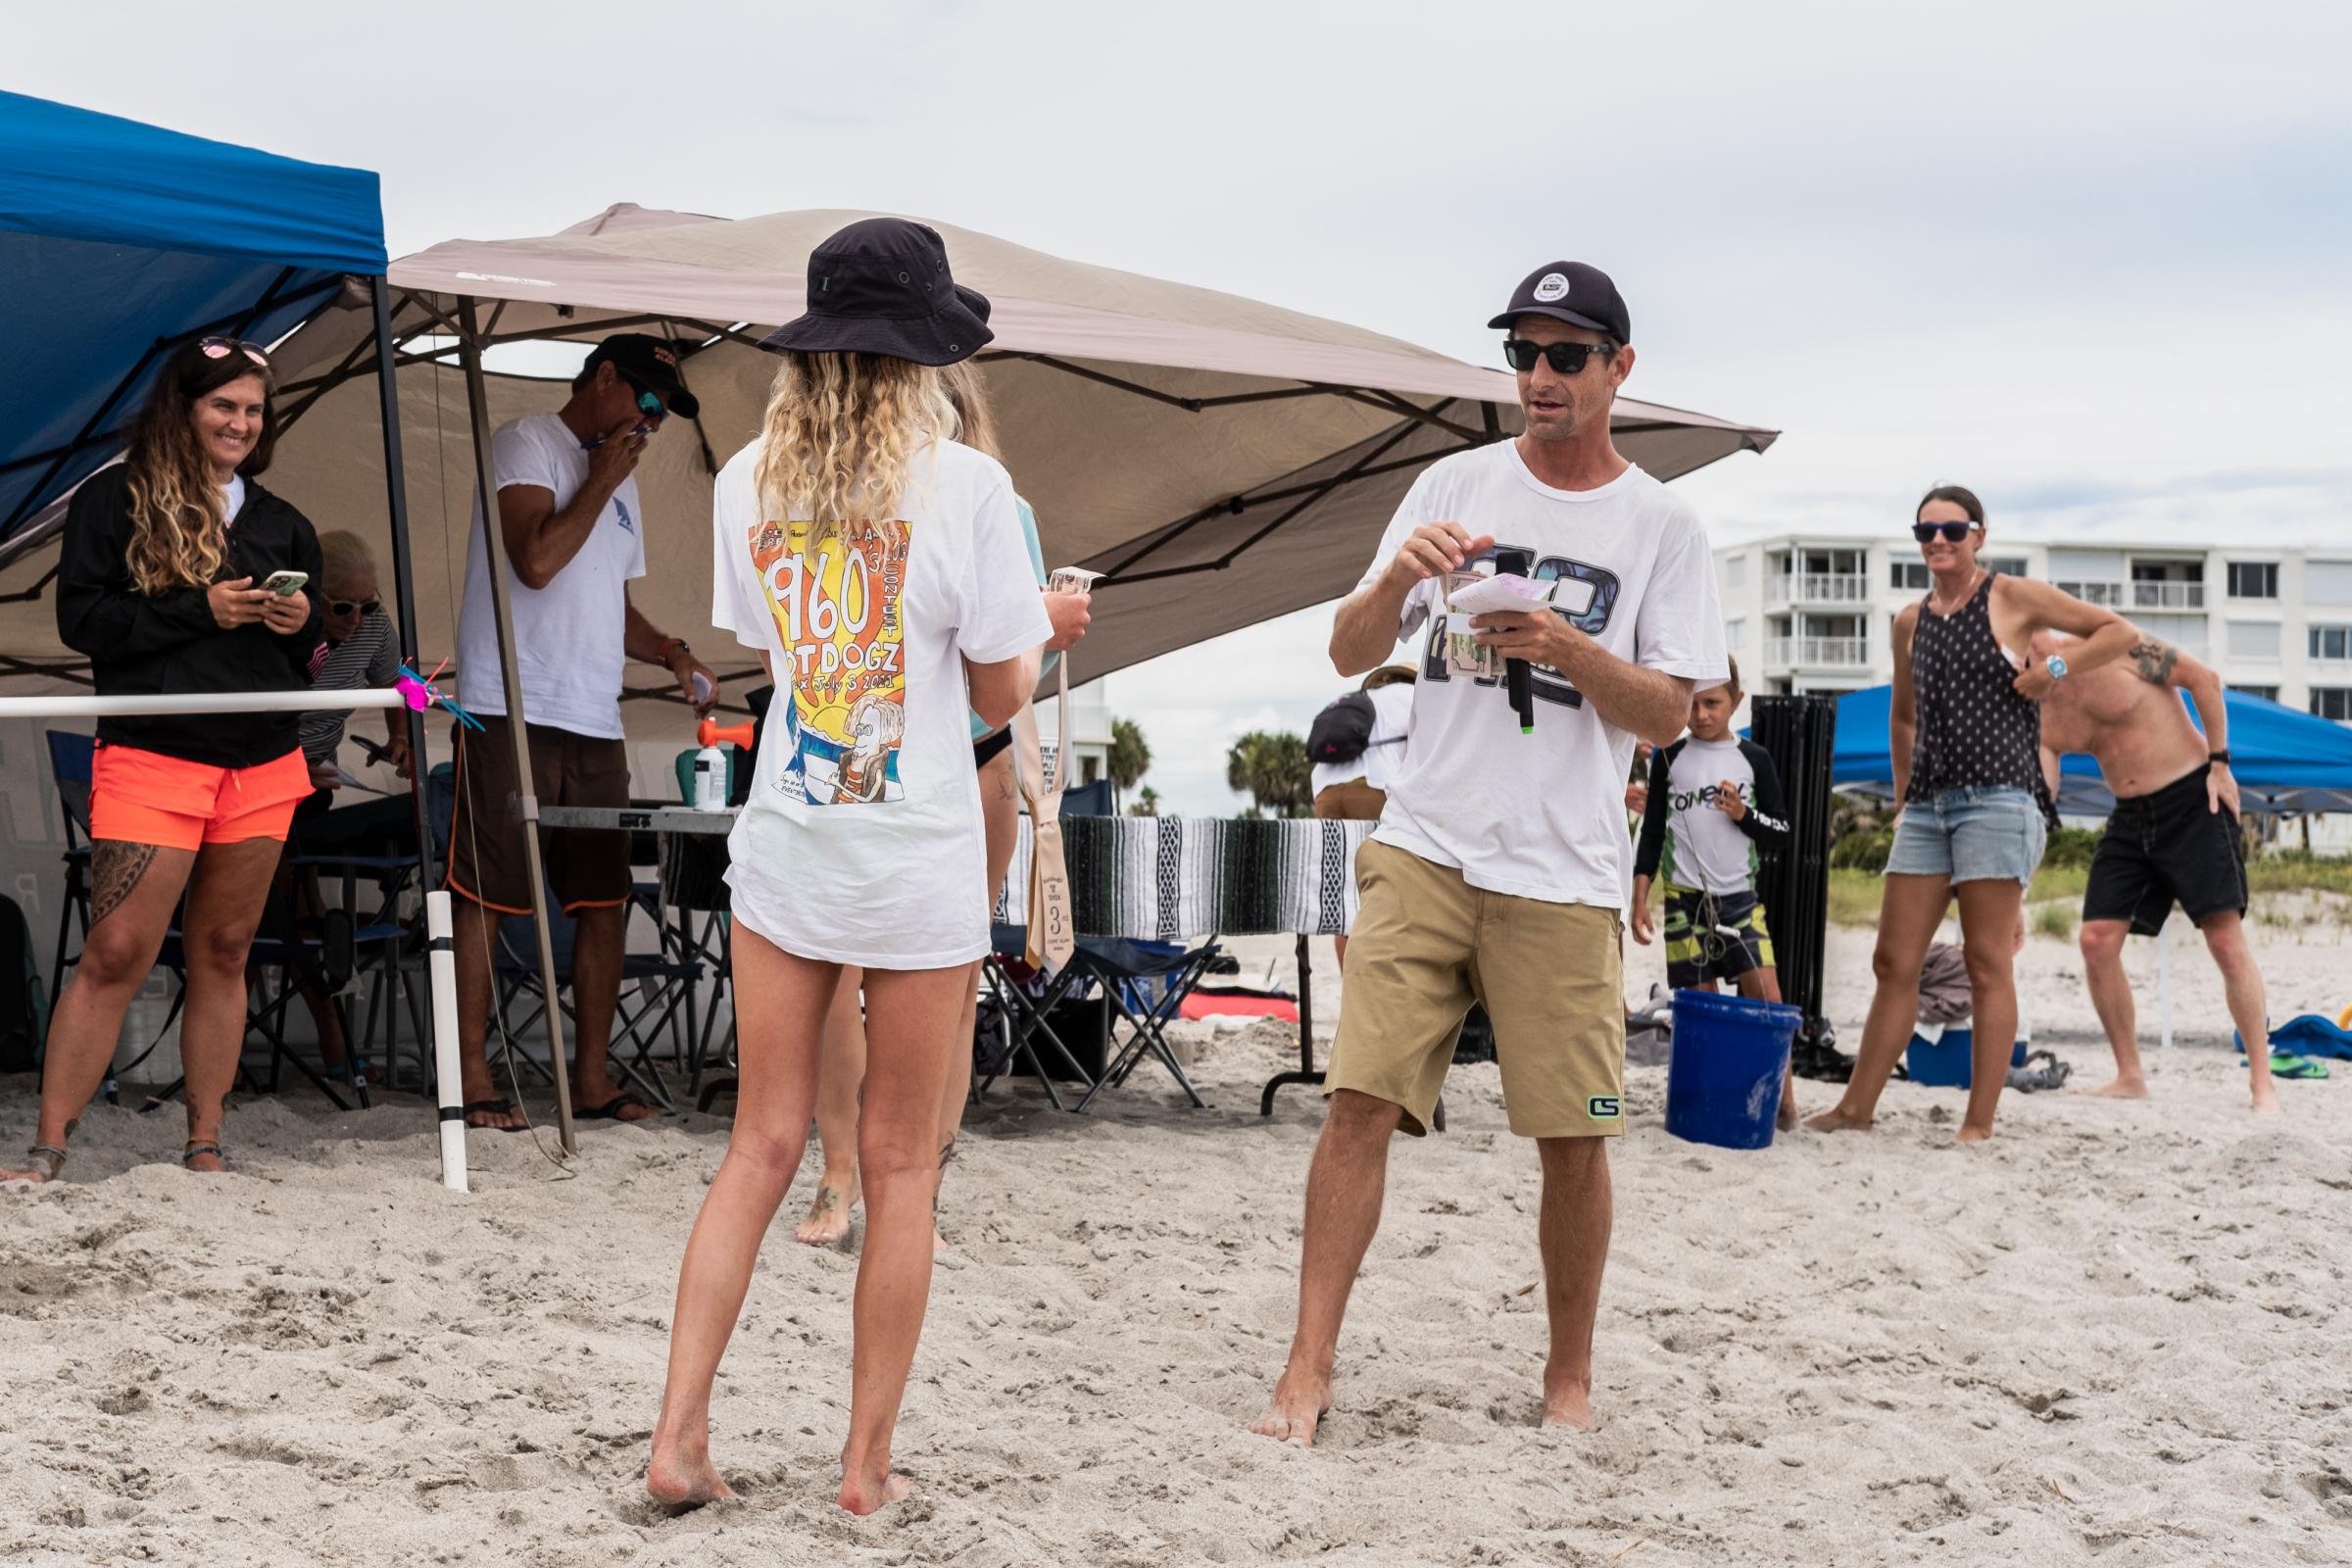 Cape Canaveral, FL. Hotdogzonastix Surf Contest July 2021 -  Sarah Stotz (L) and Dennis Griffin (R) at the Third...